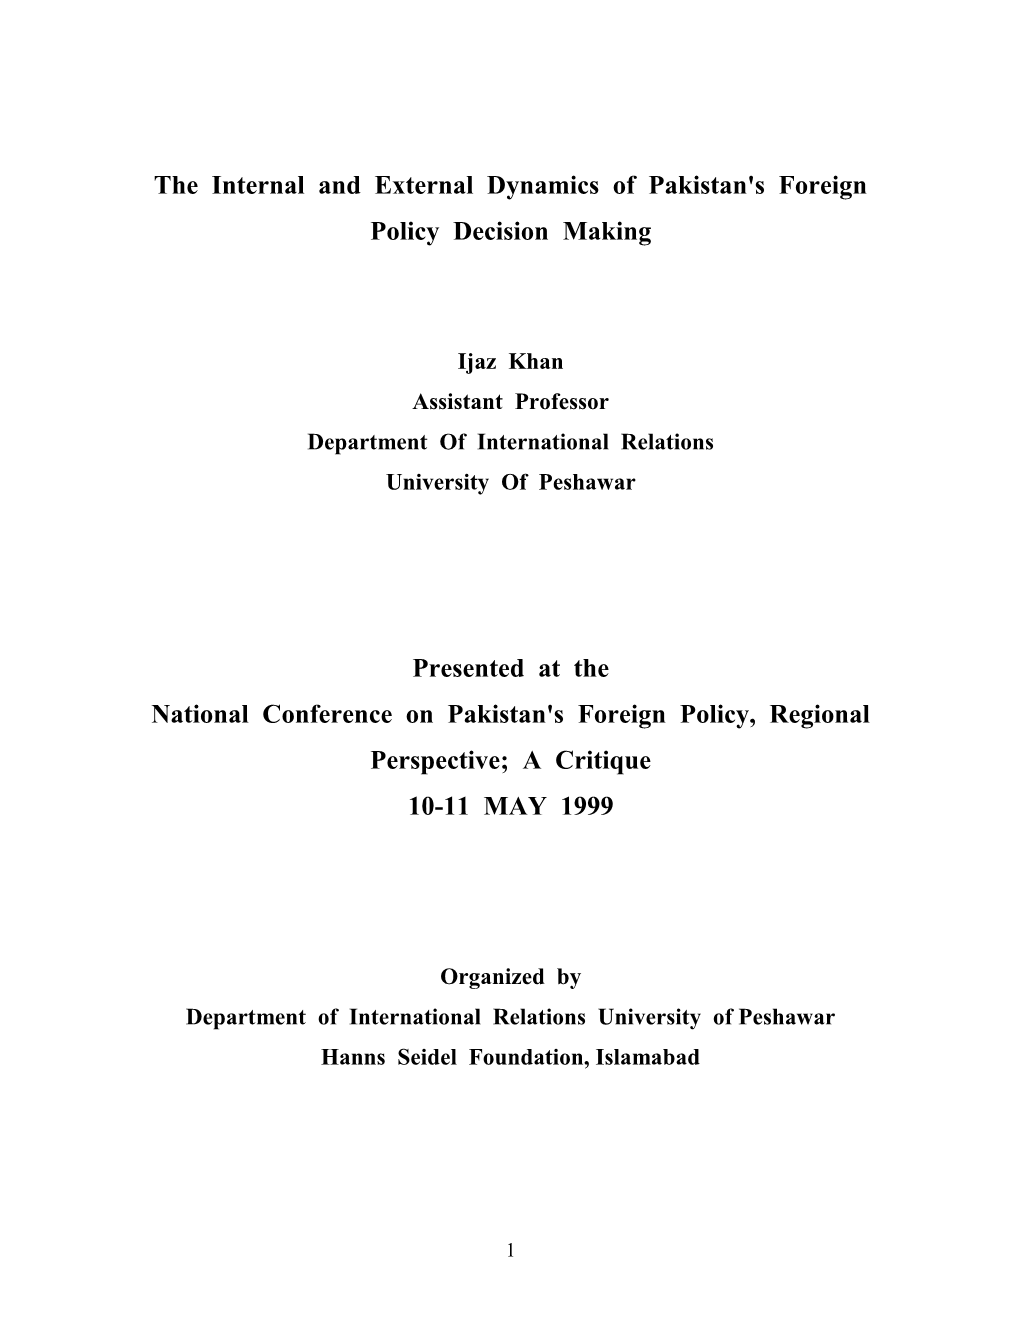 The Internal and External Dynamics of Pakistan's Foreign Policy Decision Making